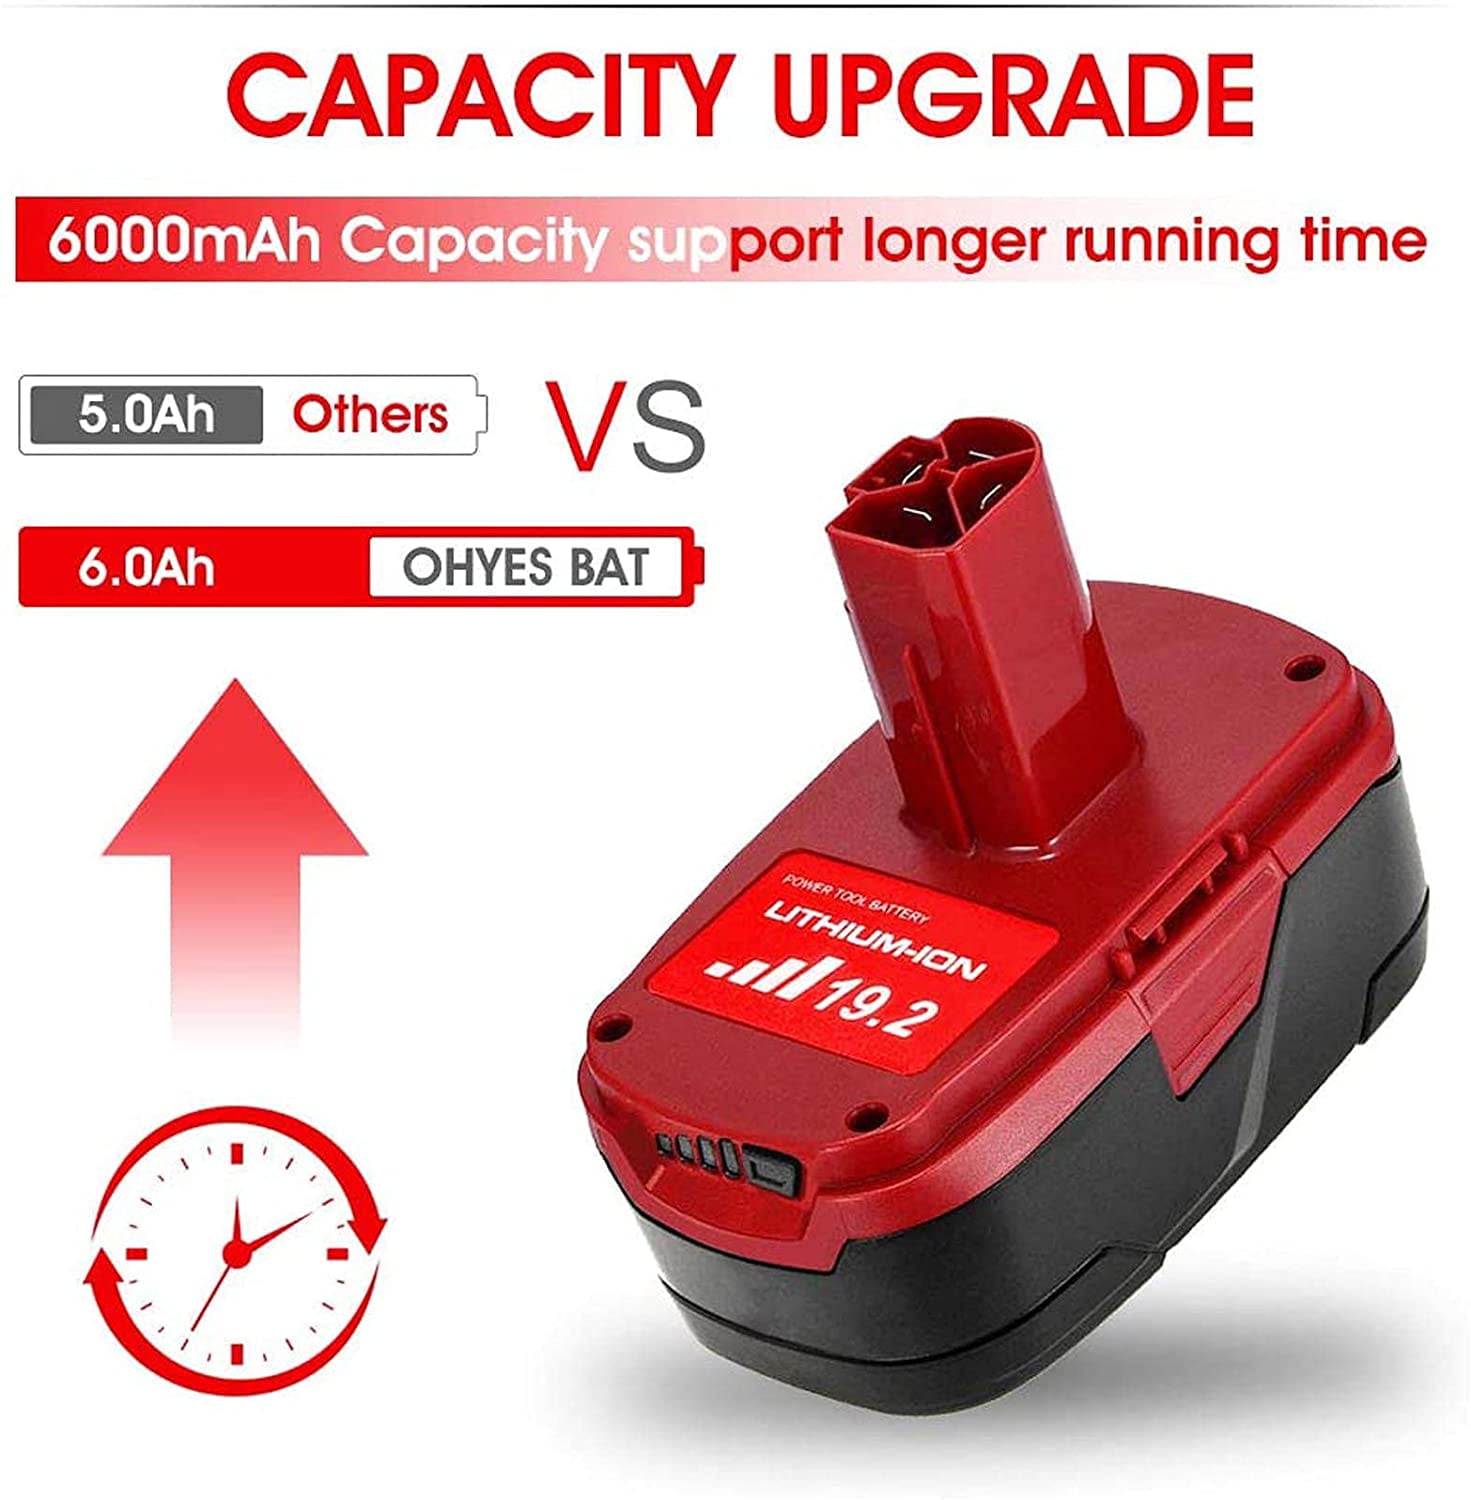 2 Packs 19.2V C3 Replacement for Craftsman 19.2 Volt Diehard Battery 130279005 11375 11376 11045 1323903 315.115410 Cordless Power Tools